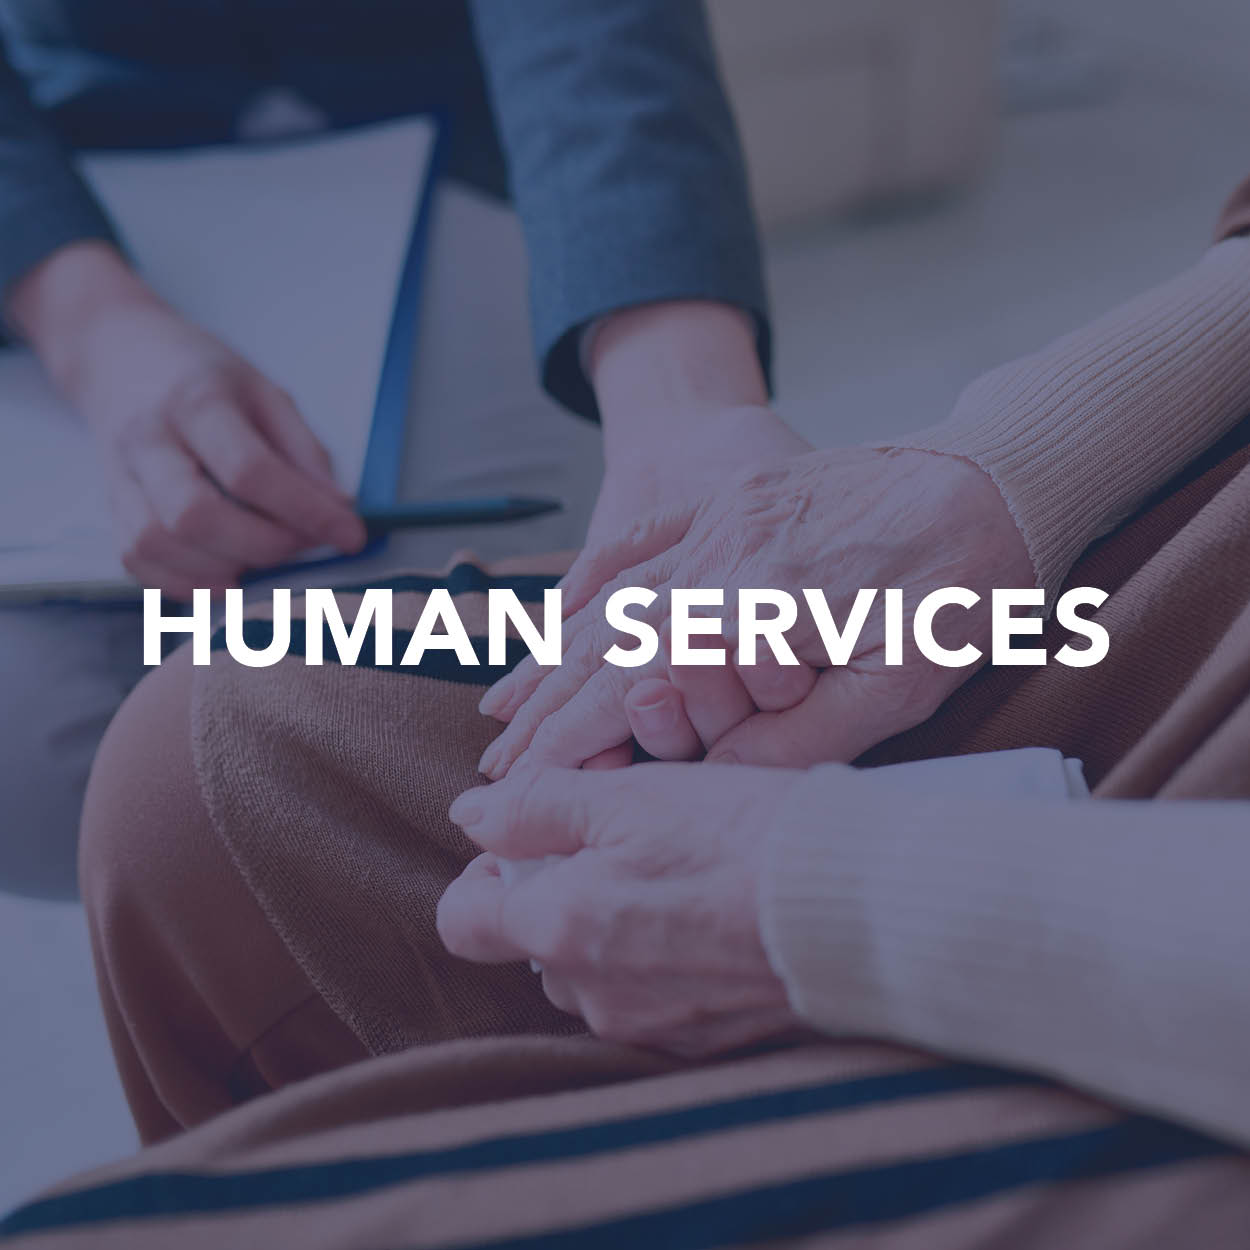 Human Services